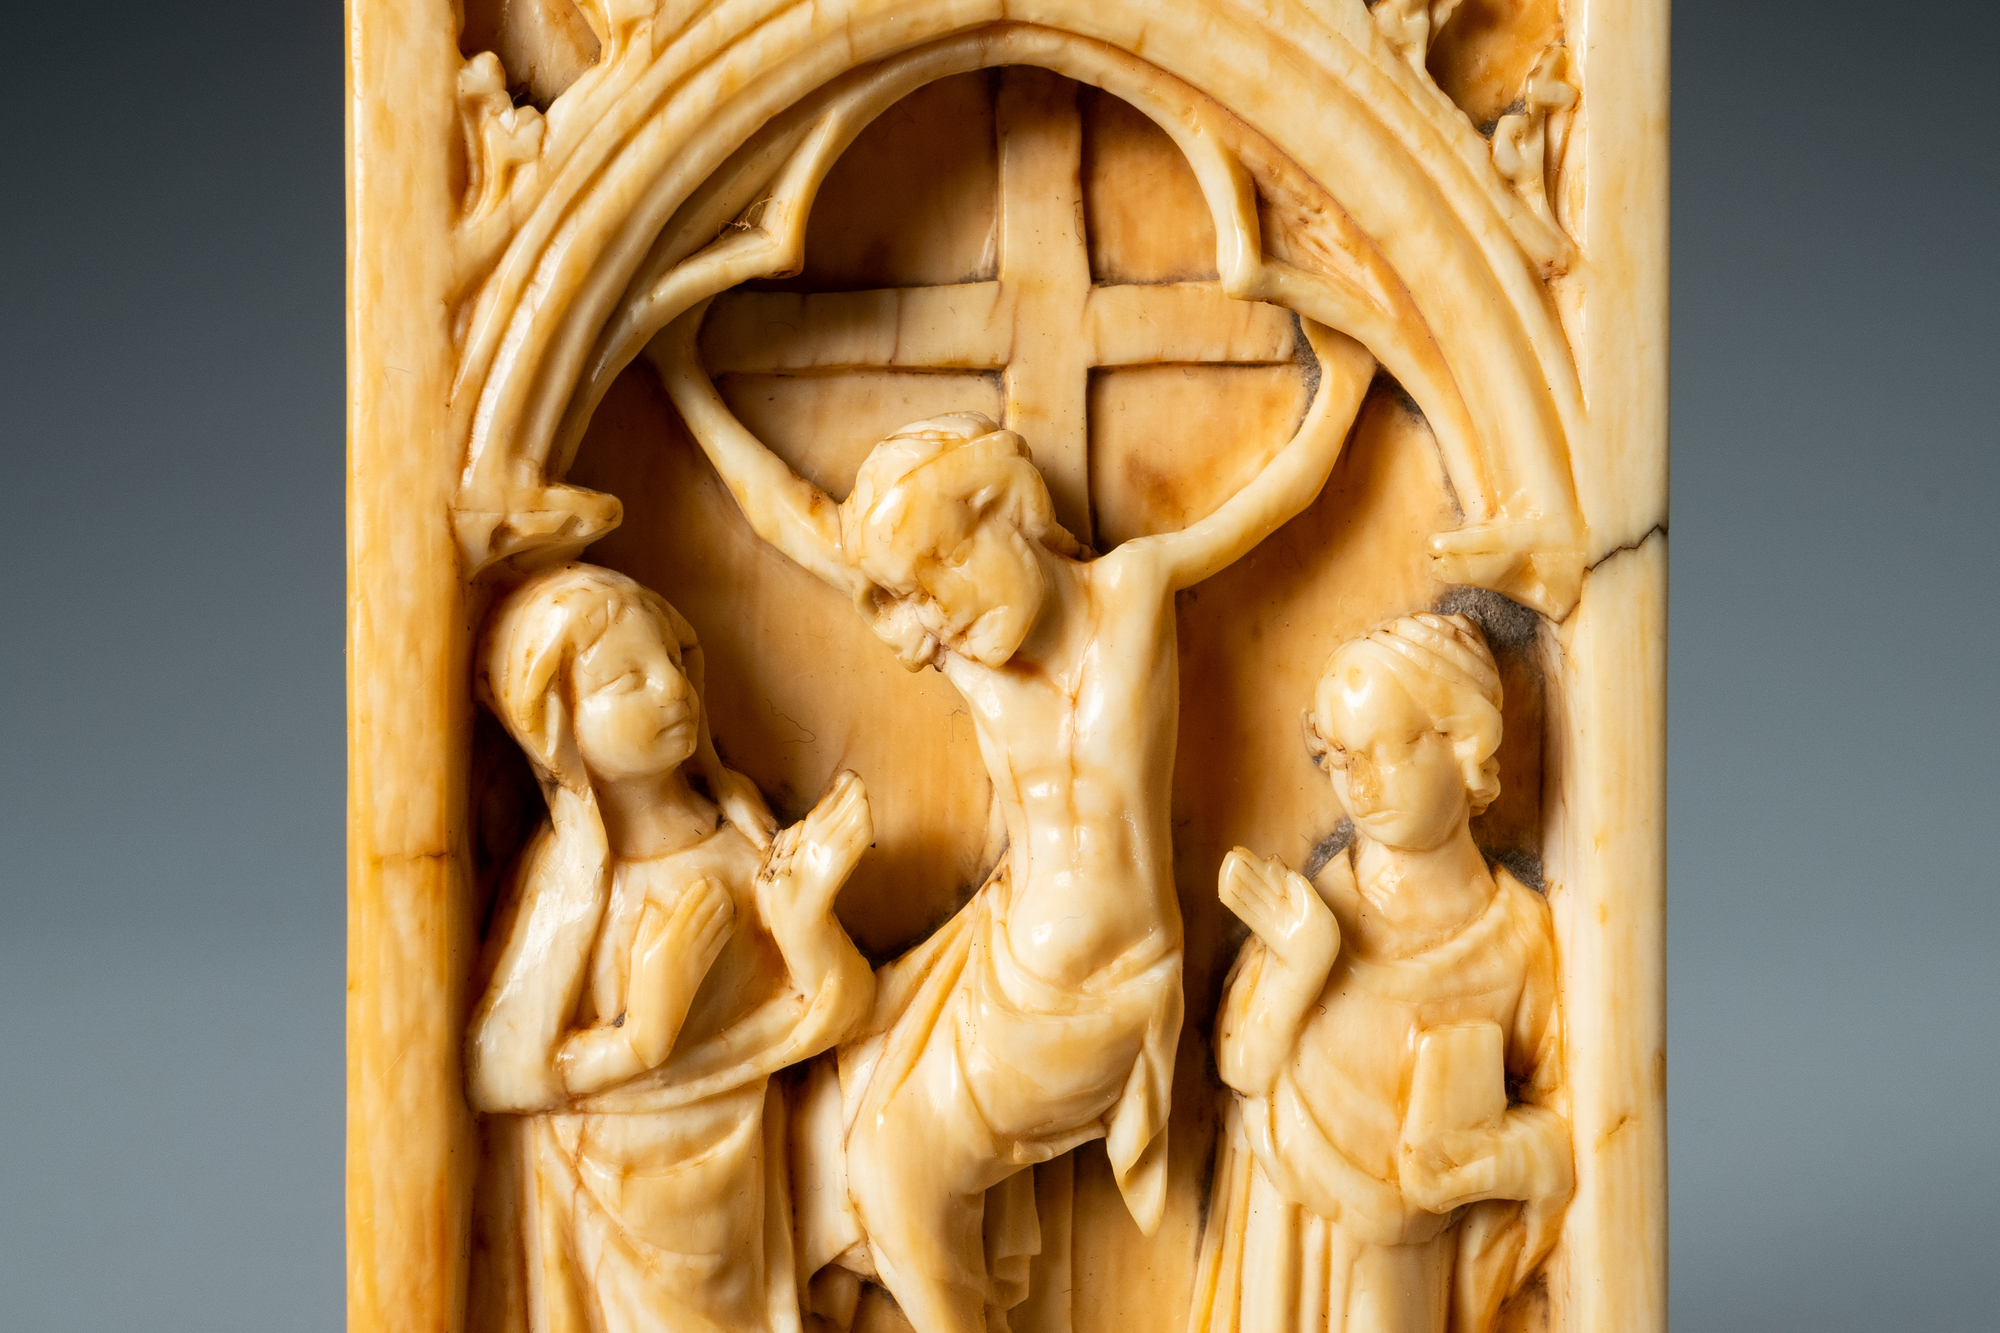 The right panel of an ivory 'Crucifixion' diptych, probably Paris, 14th C. - Image 8 of 9